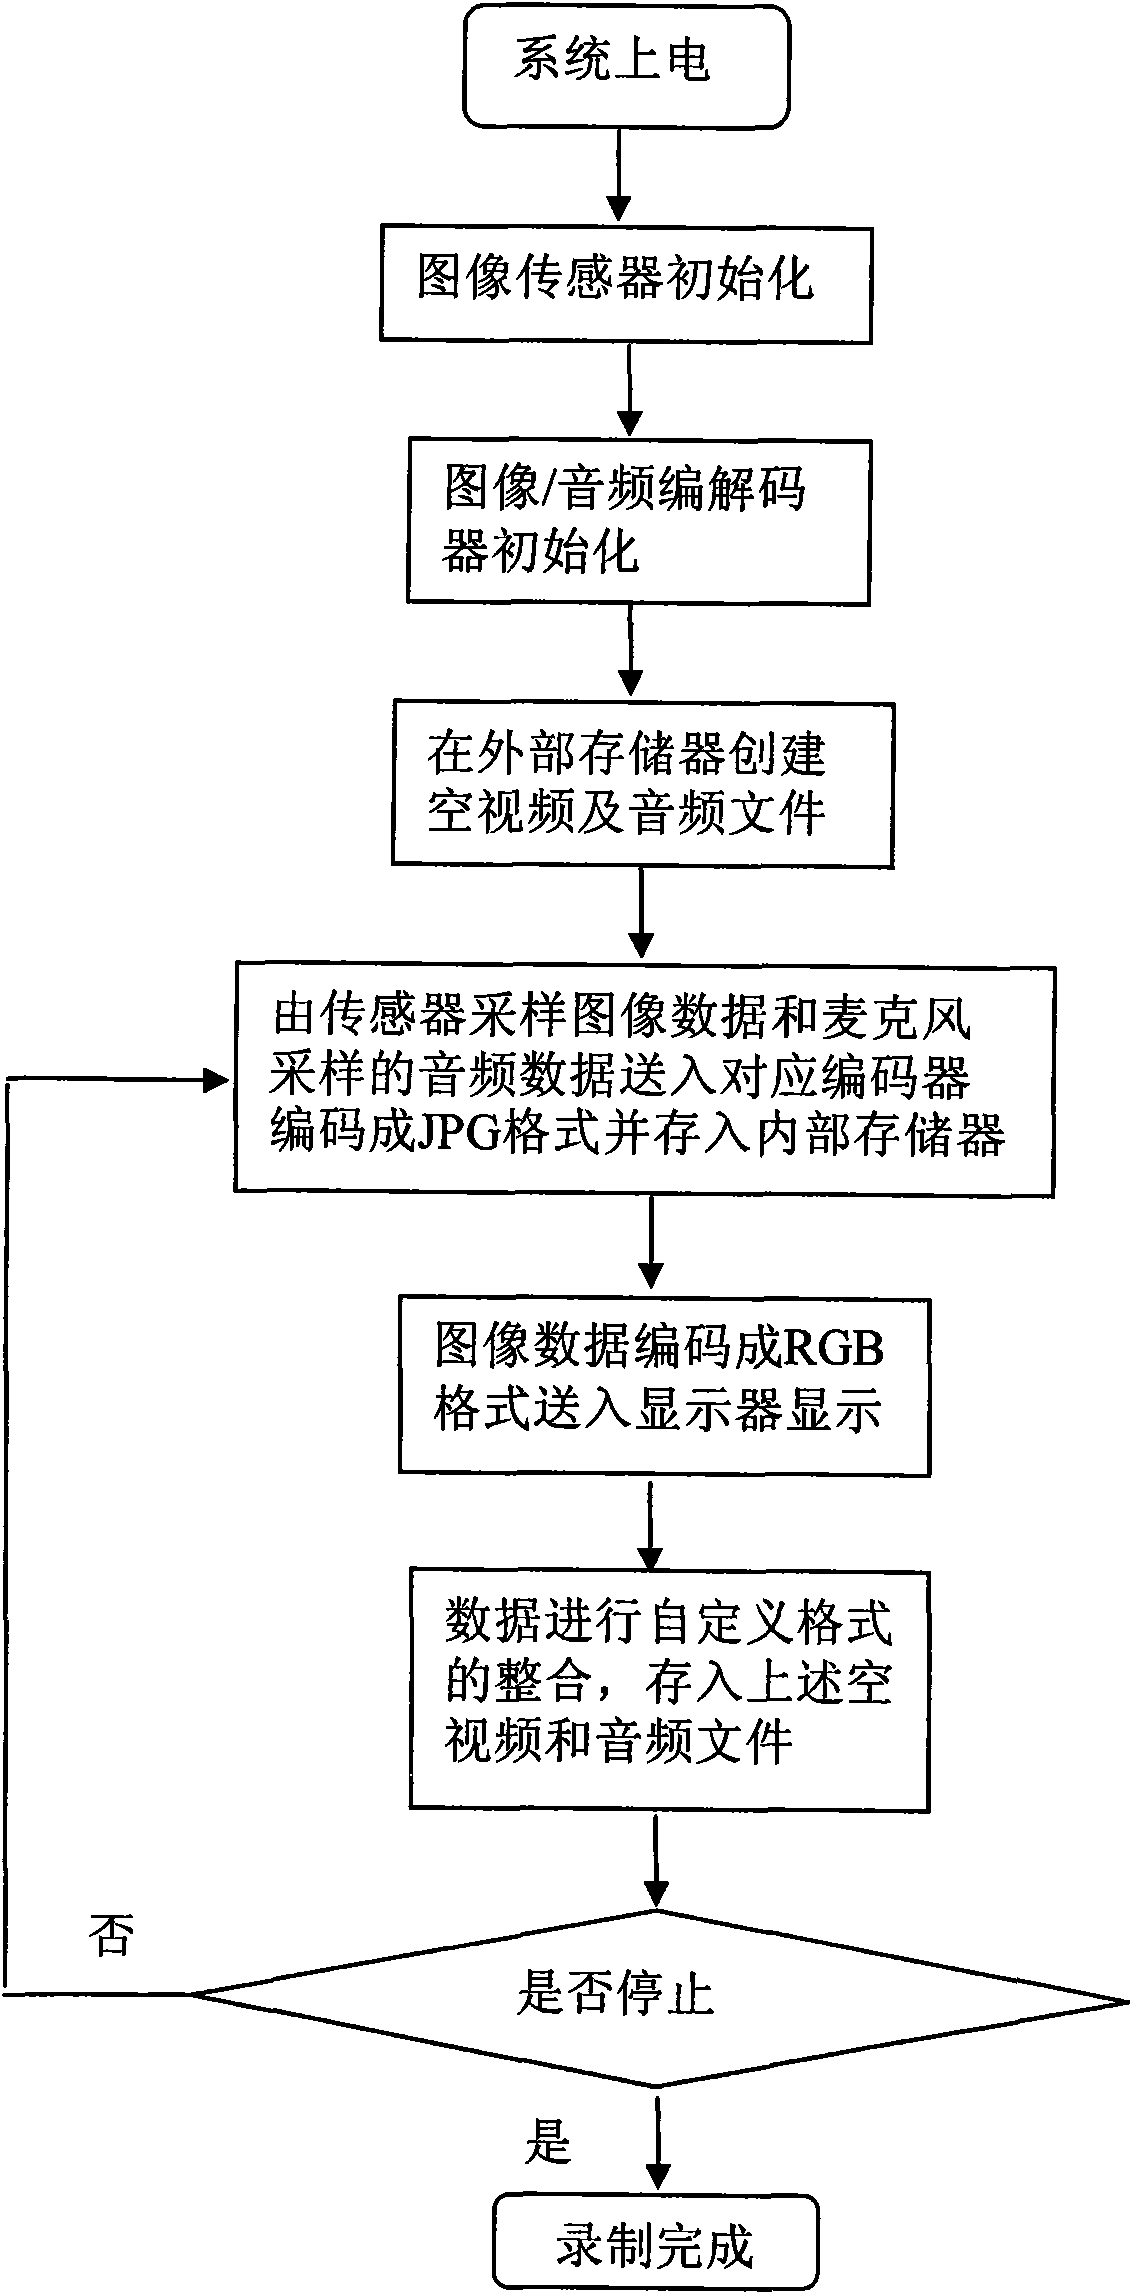 Mobile terminal for processing multimedia data in user-defined format and realization method thereof